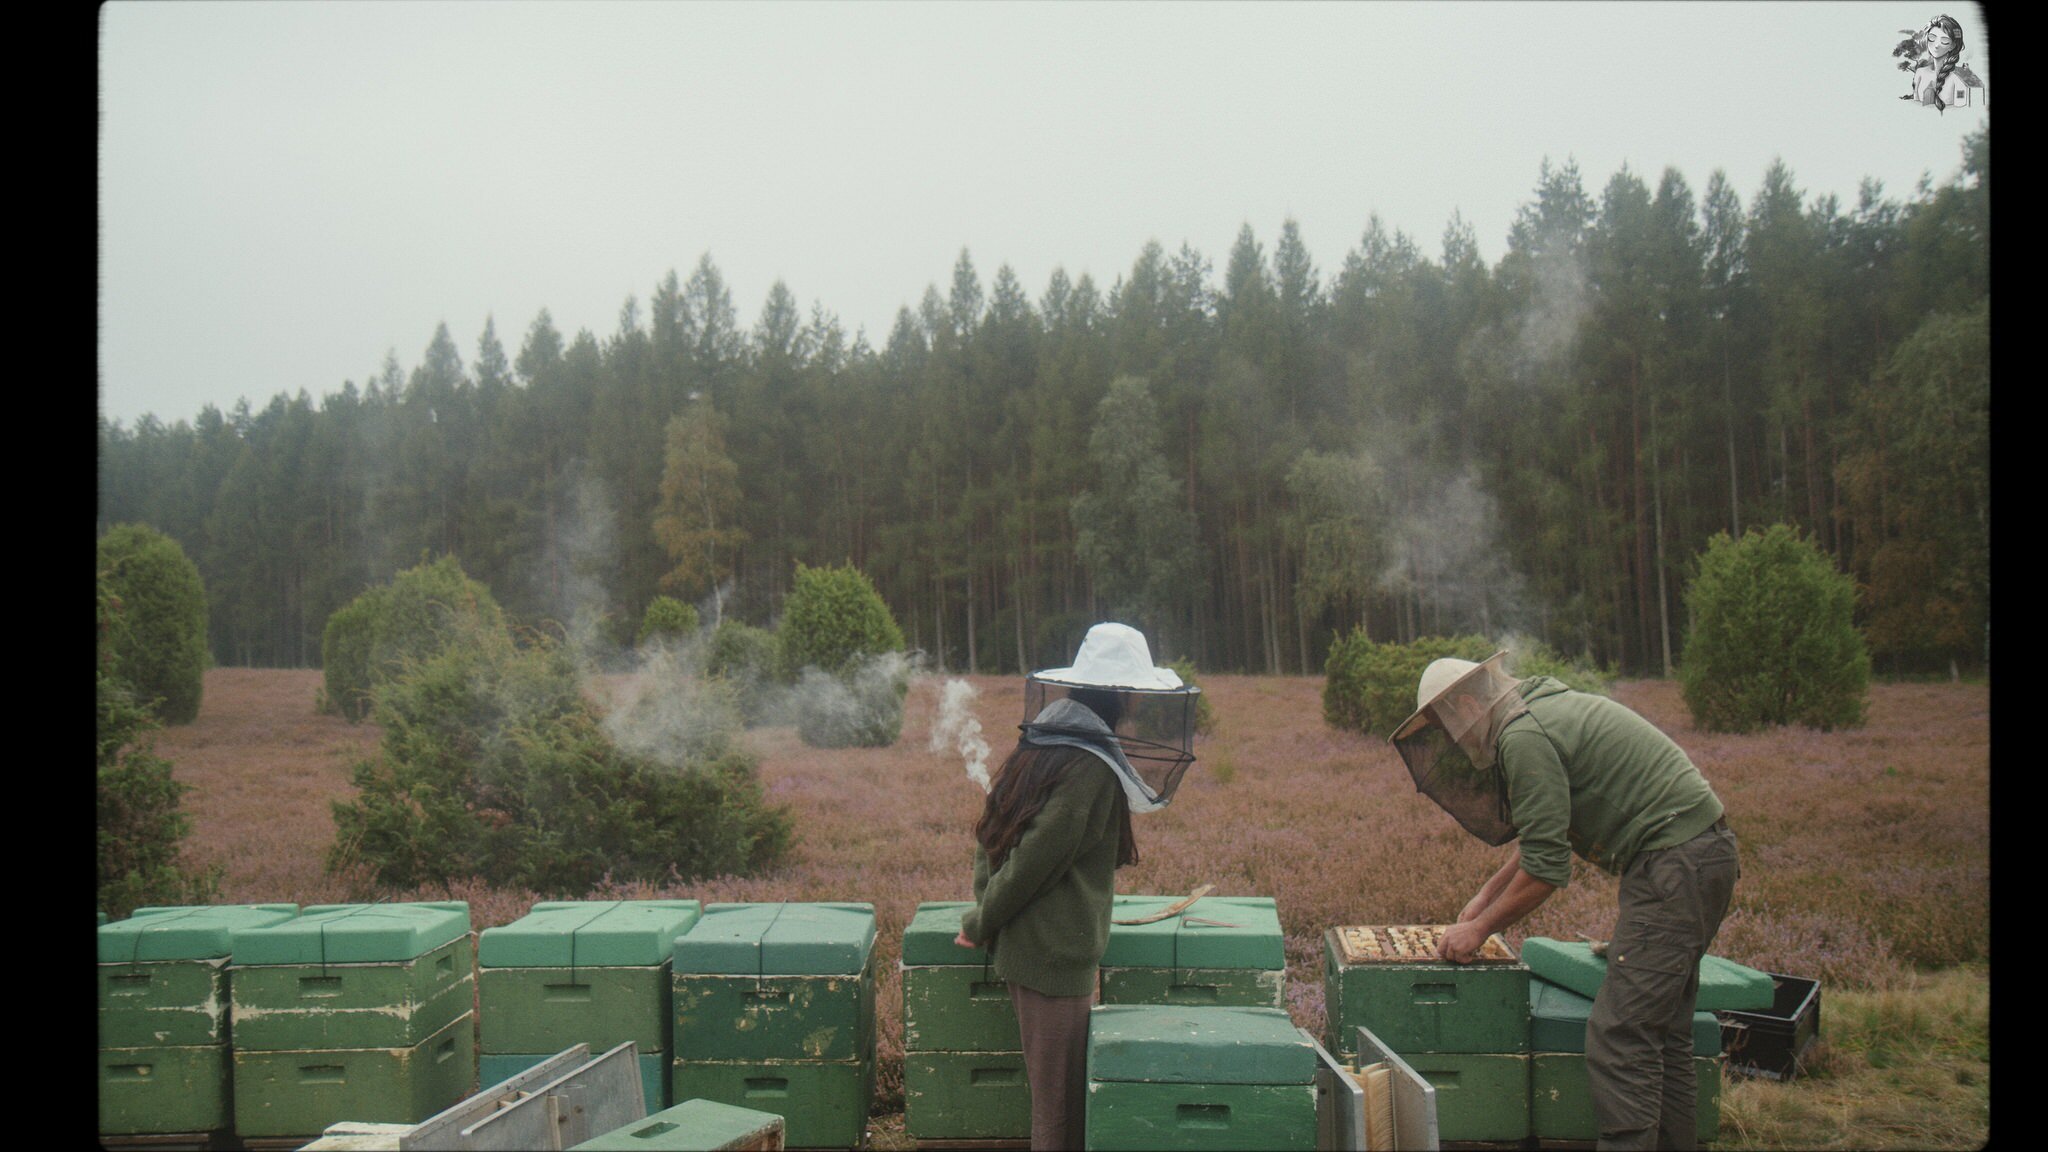 One Day Learning the Art of Beekeeping and Making Honey - Her86m2 - 2.jpg